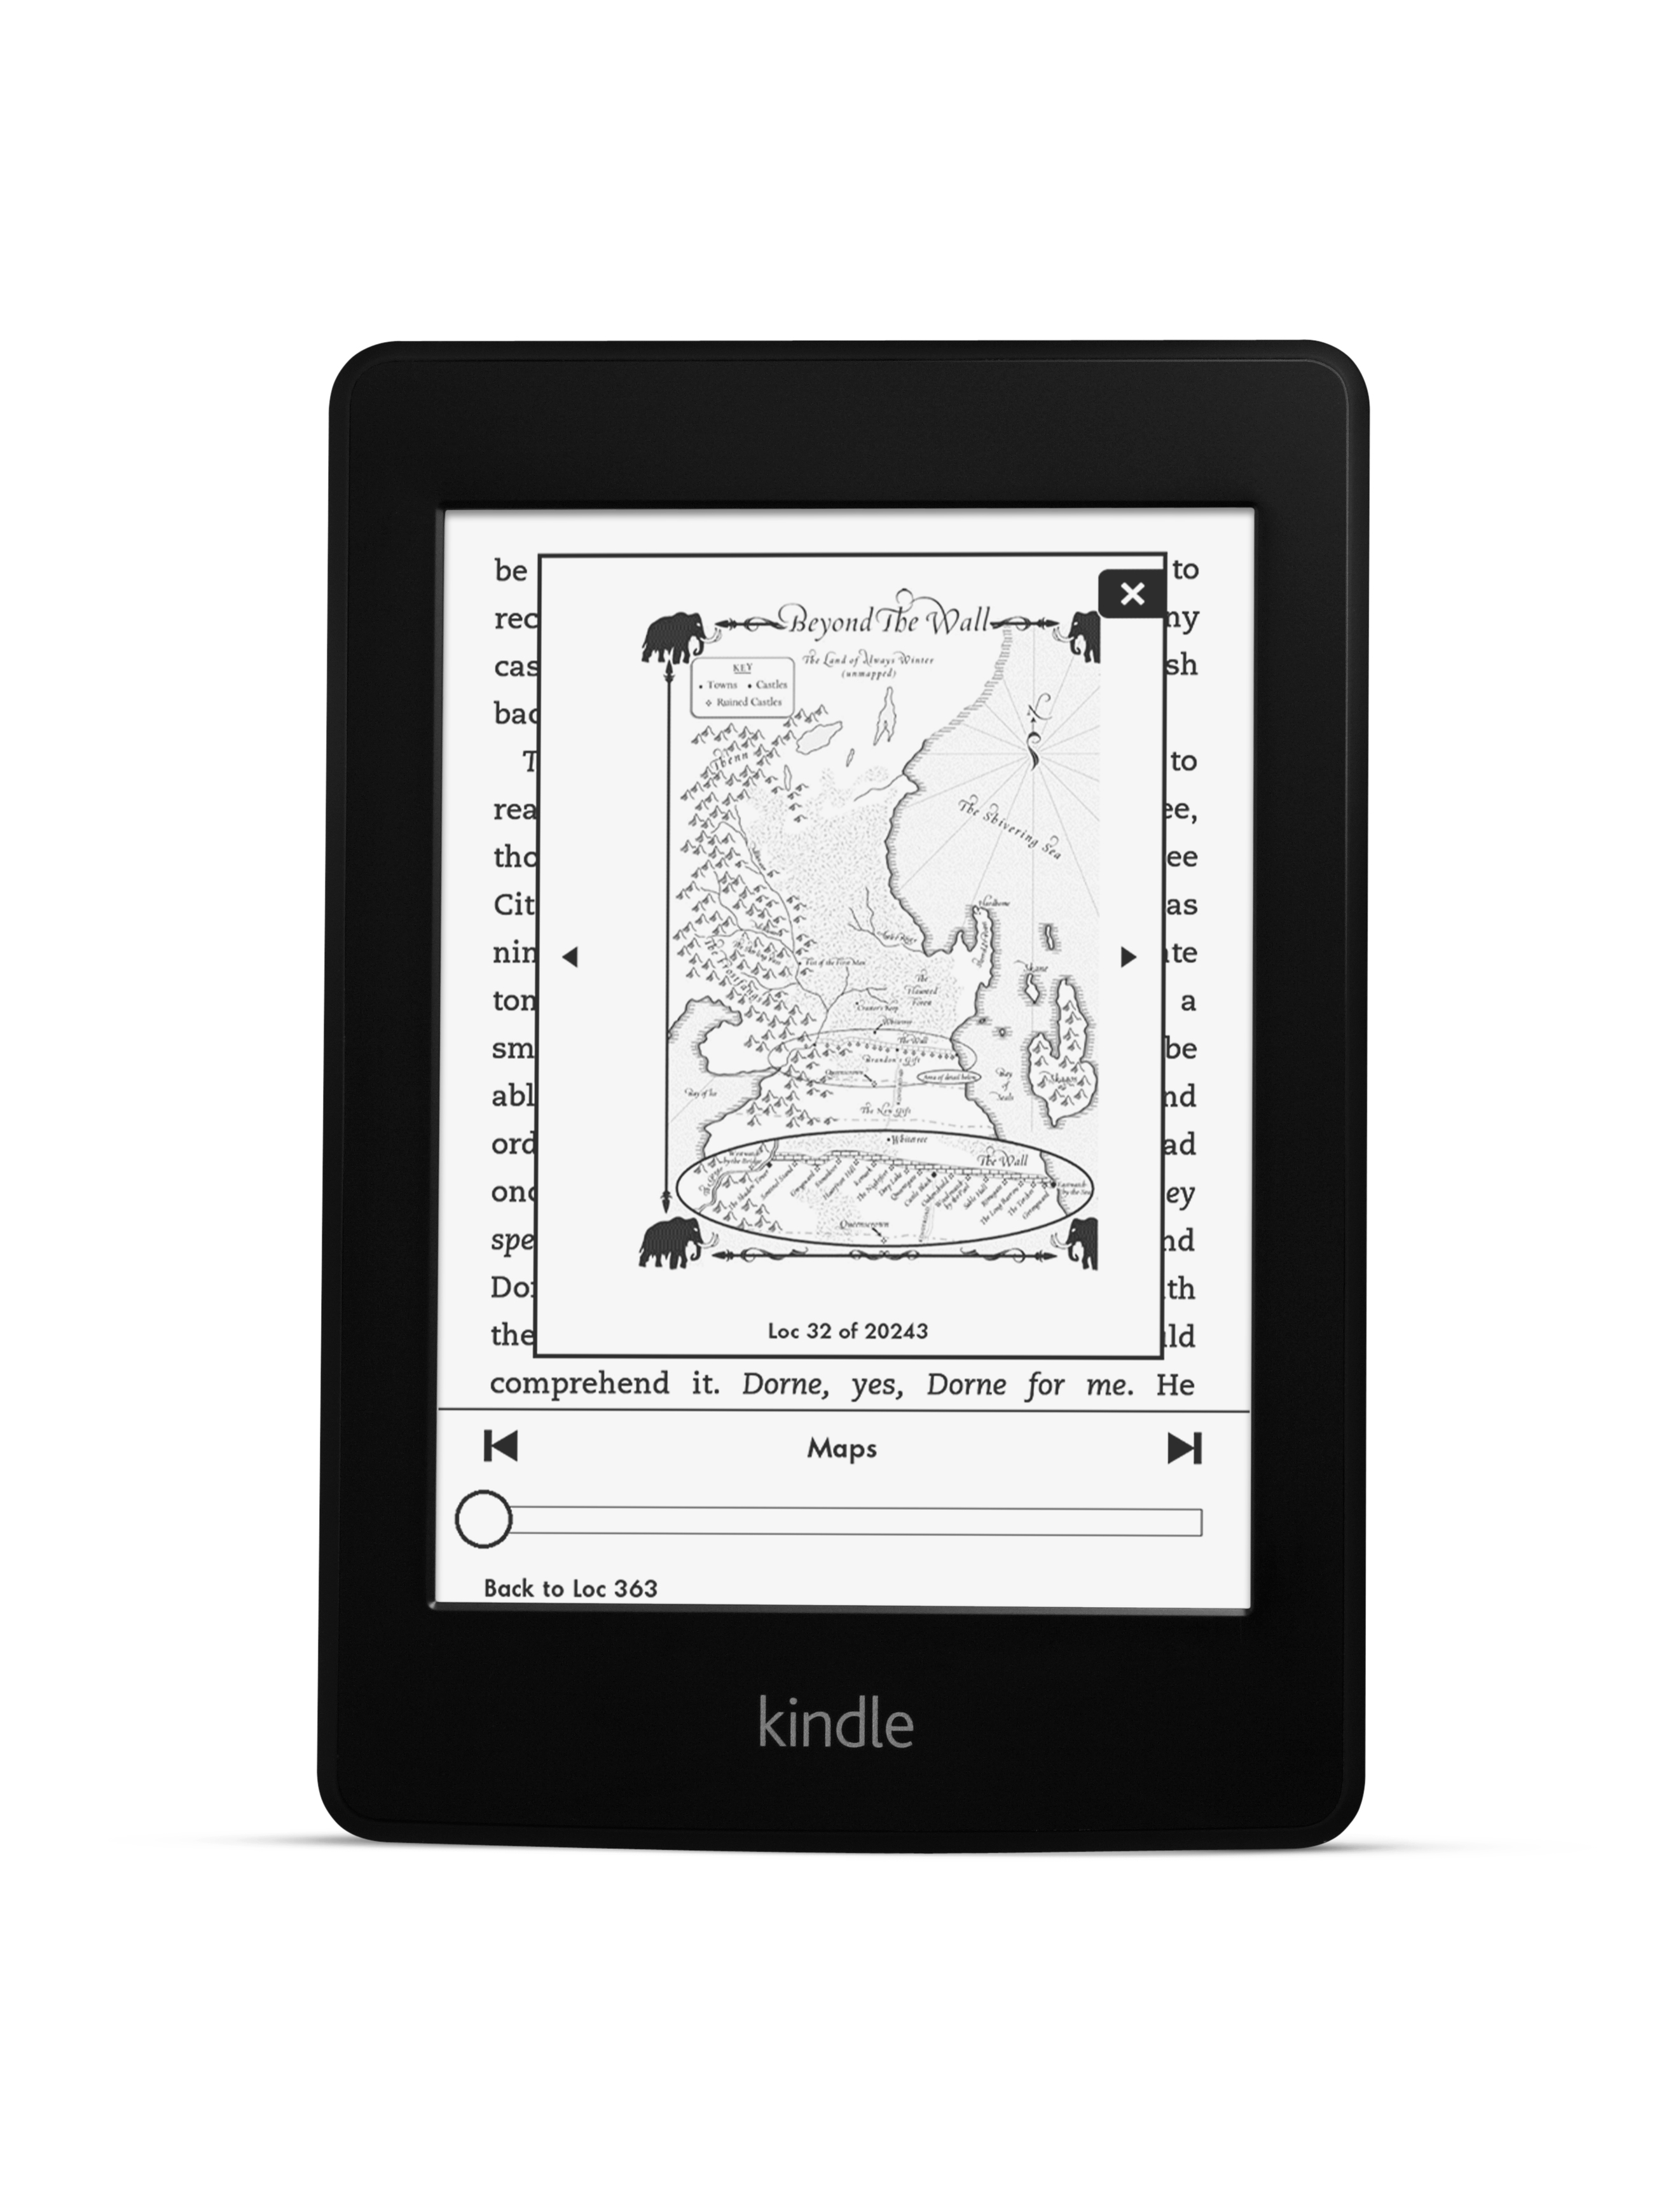 Introducing the All-New Kindle Paperwhite—The 6th Generation of